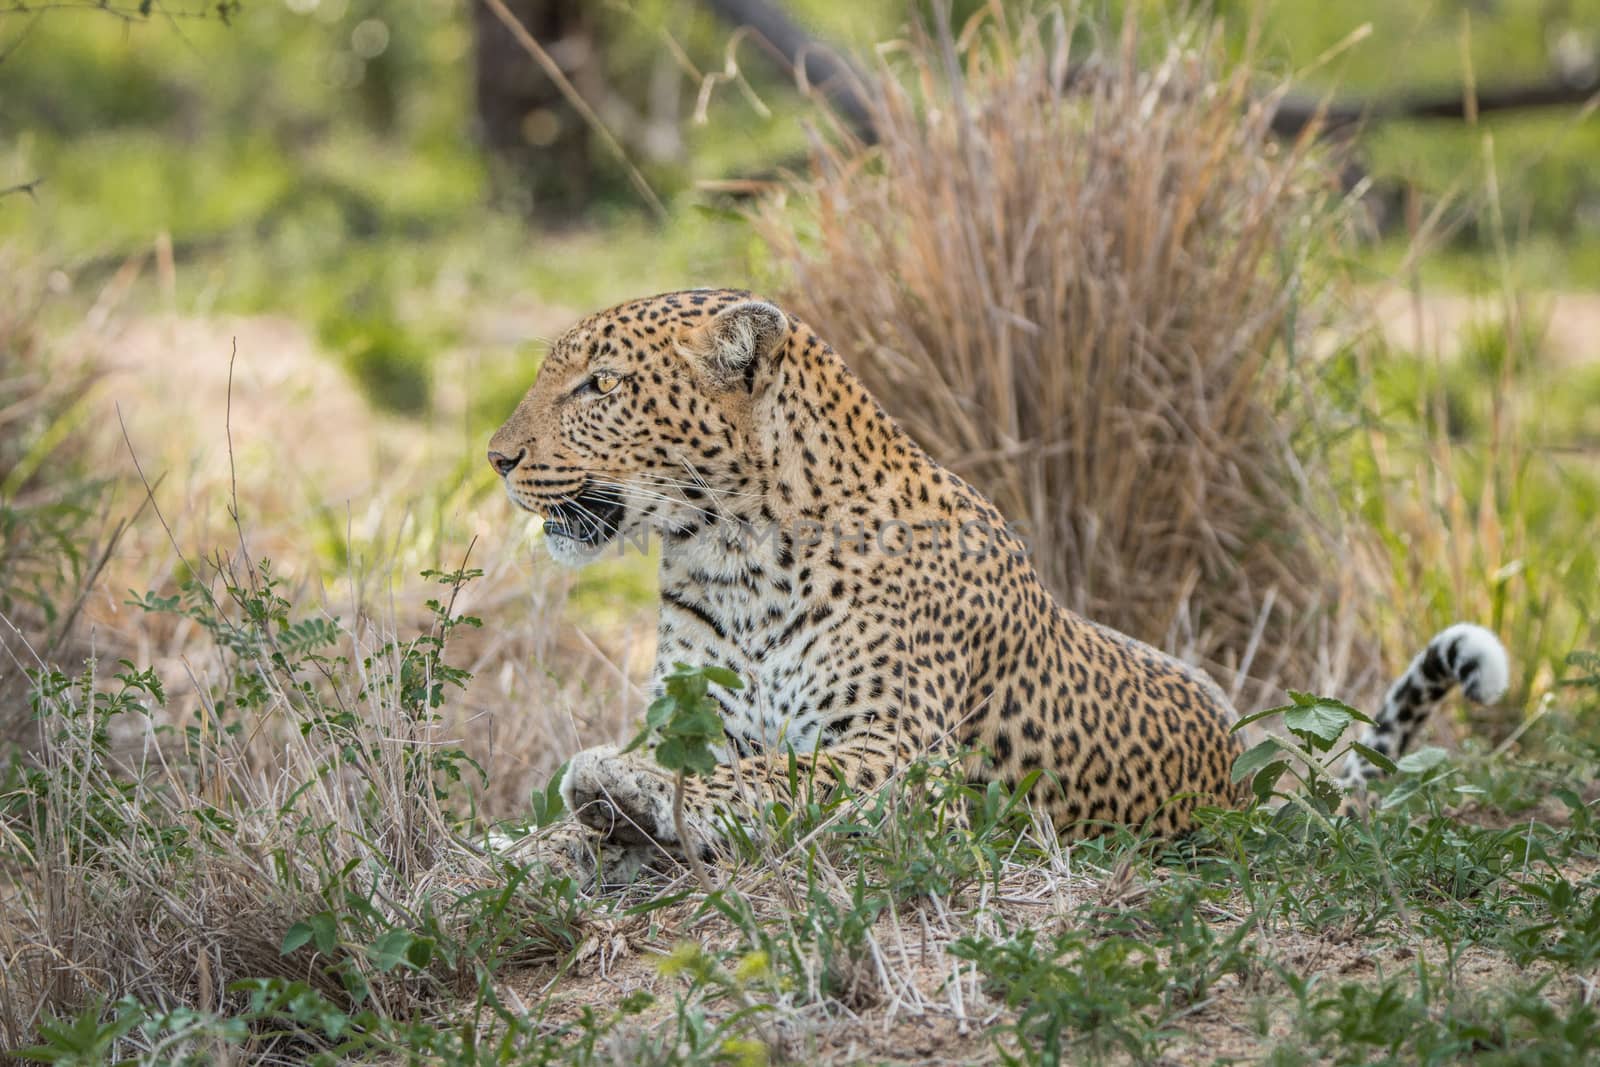 Leopard laying in the grass in the Kruger National Park, South Africa.